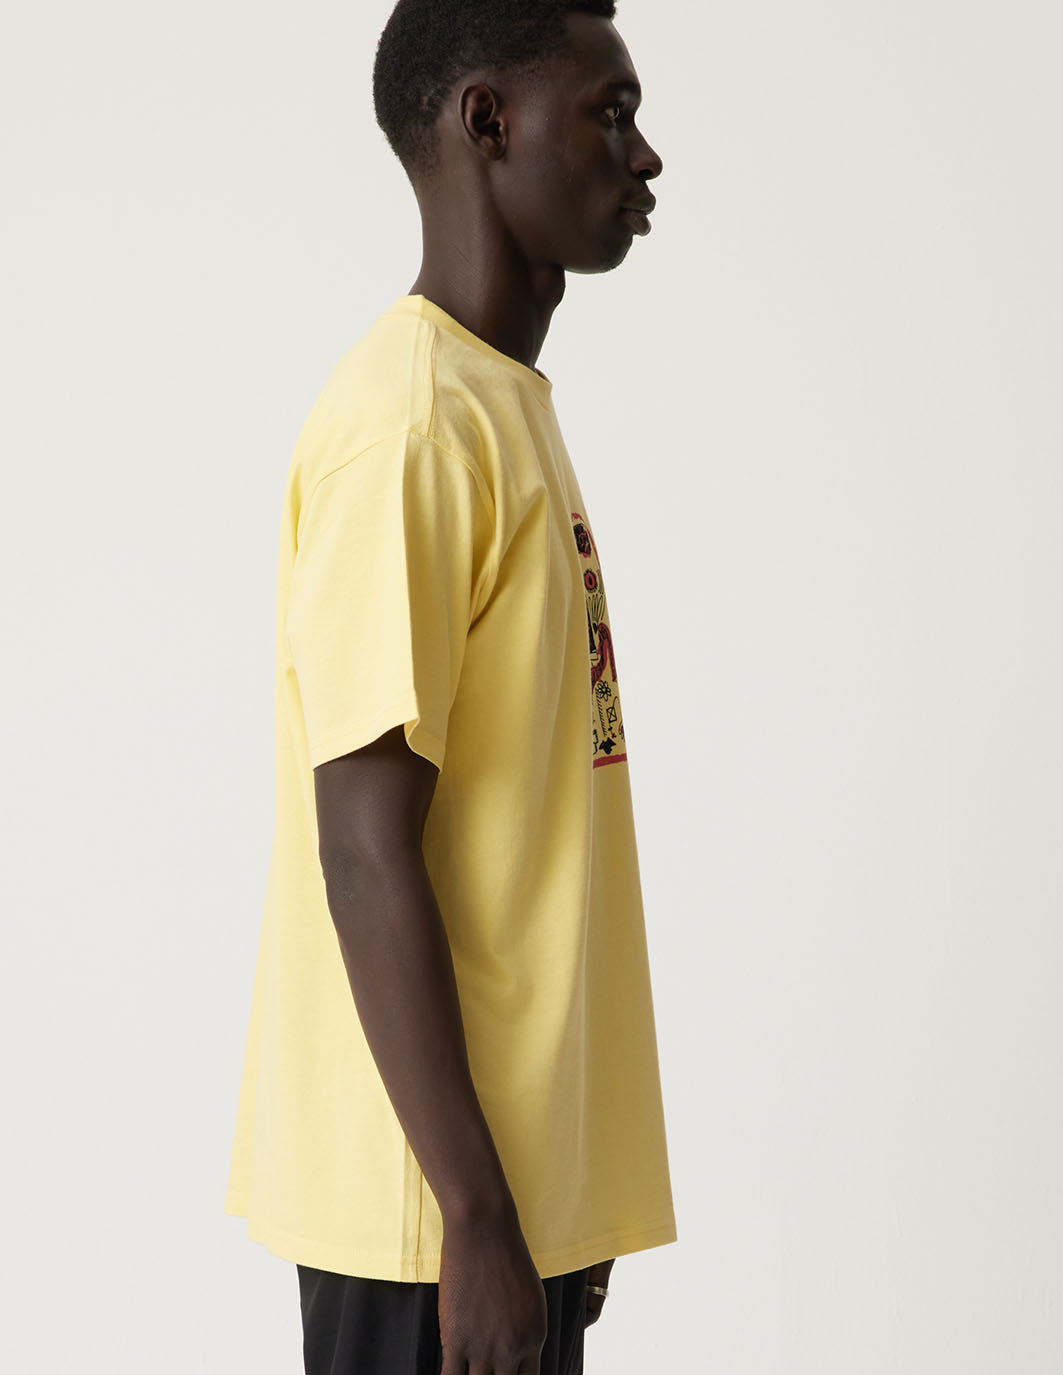 COGNITION T-SHIRT | FLAX